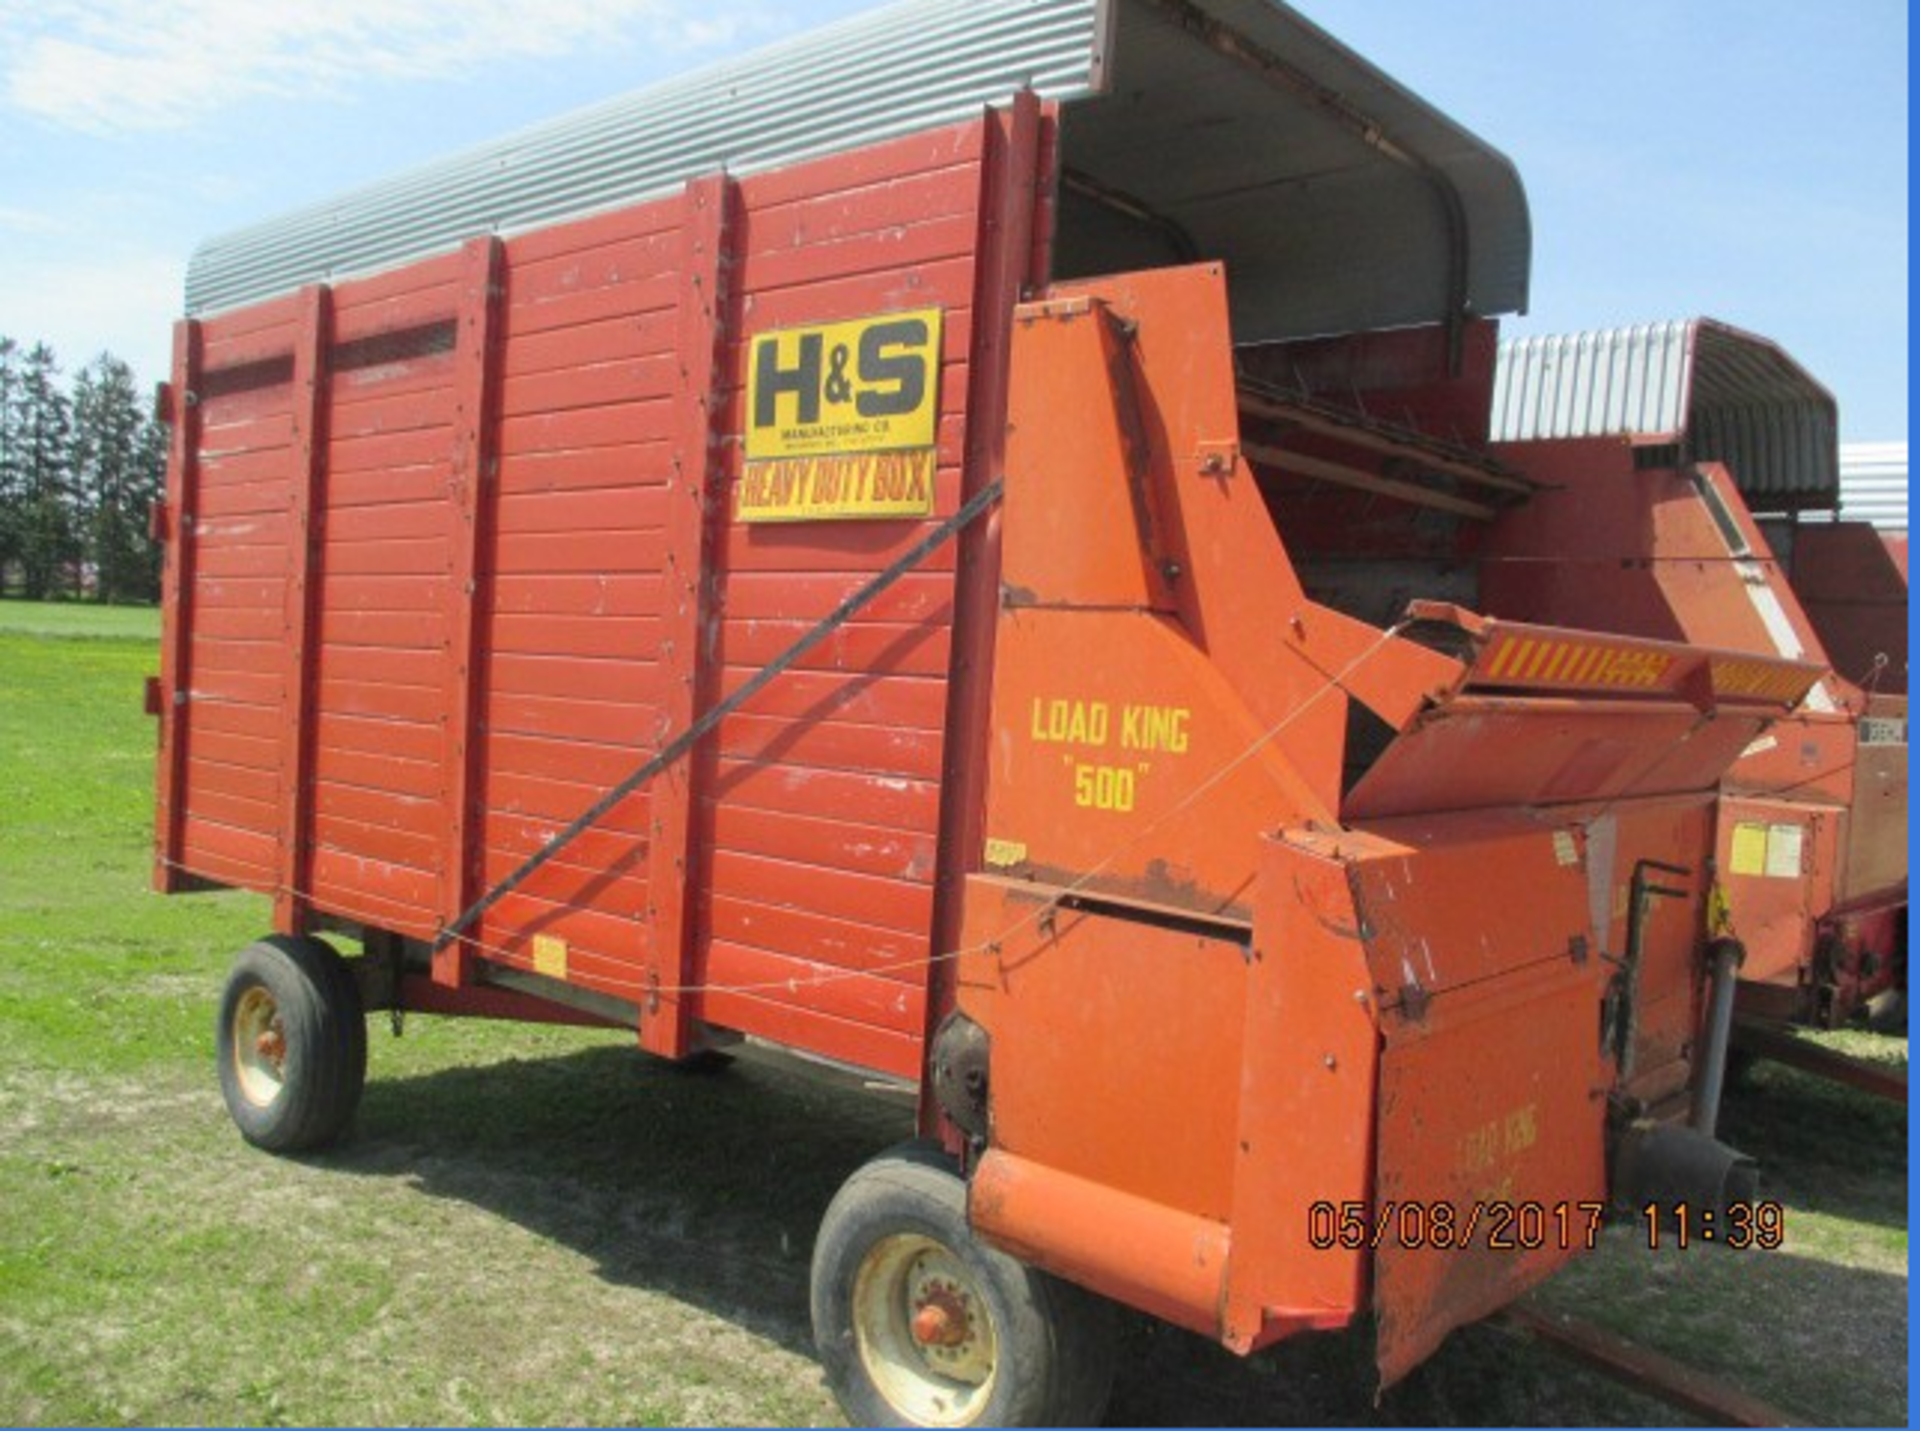 Full Catalog Coming Soon! HEAVY EQUIPMENT , TRUCKS, AG MACHINERY CONSIGNMENT AUCTION - Image 3 of 5